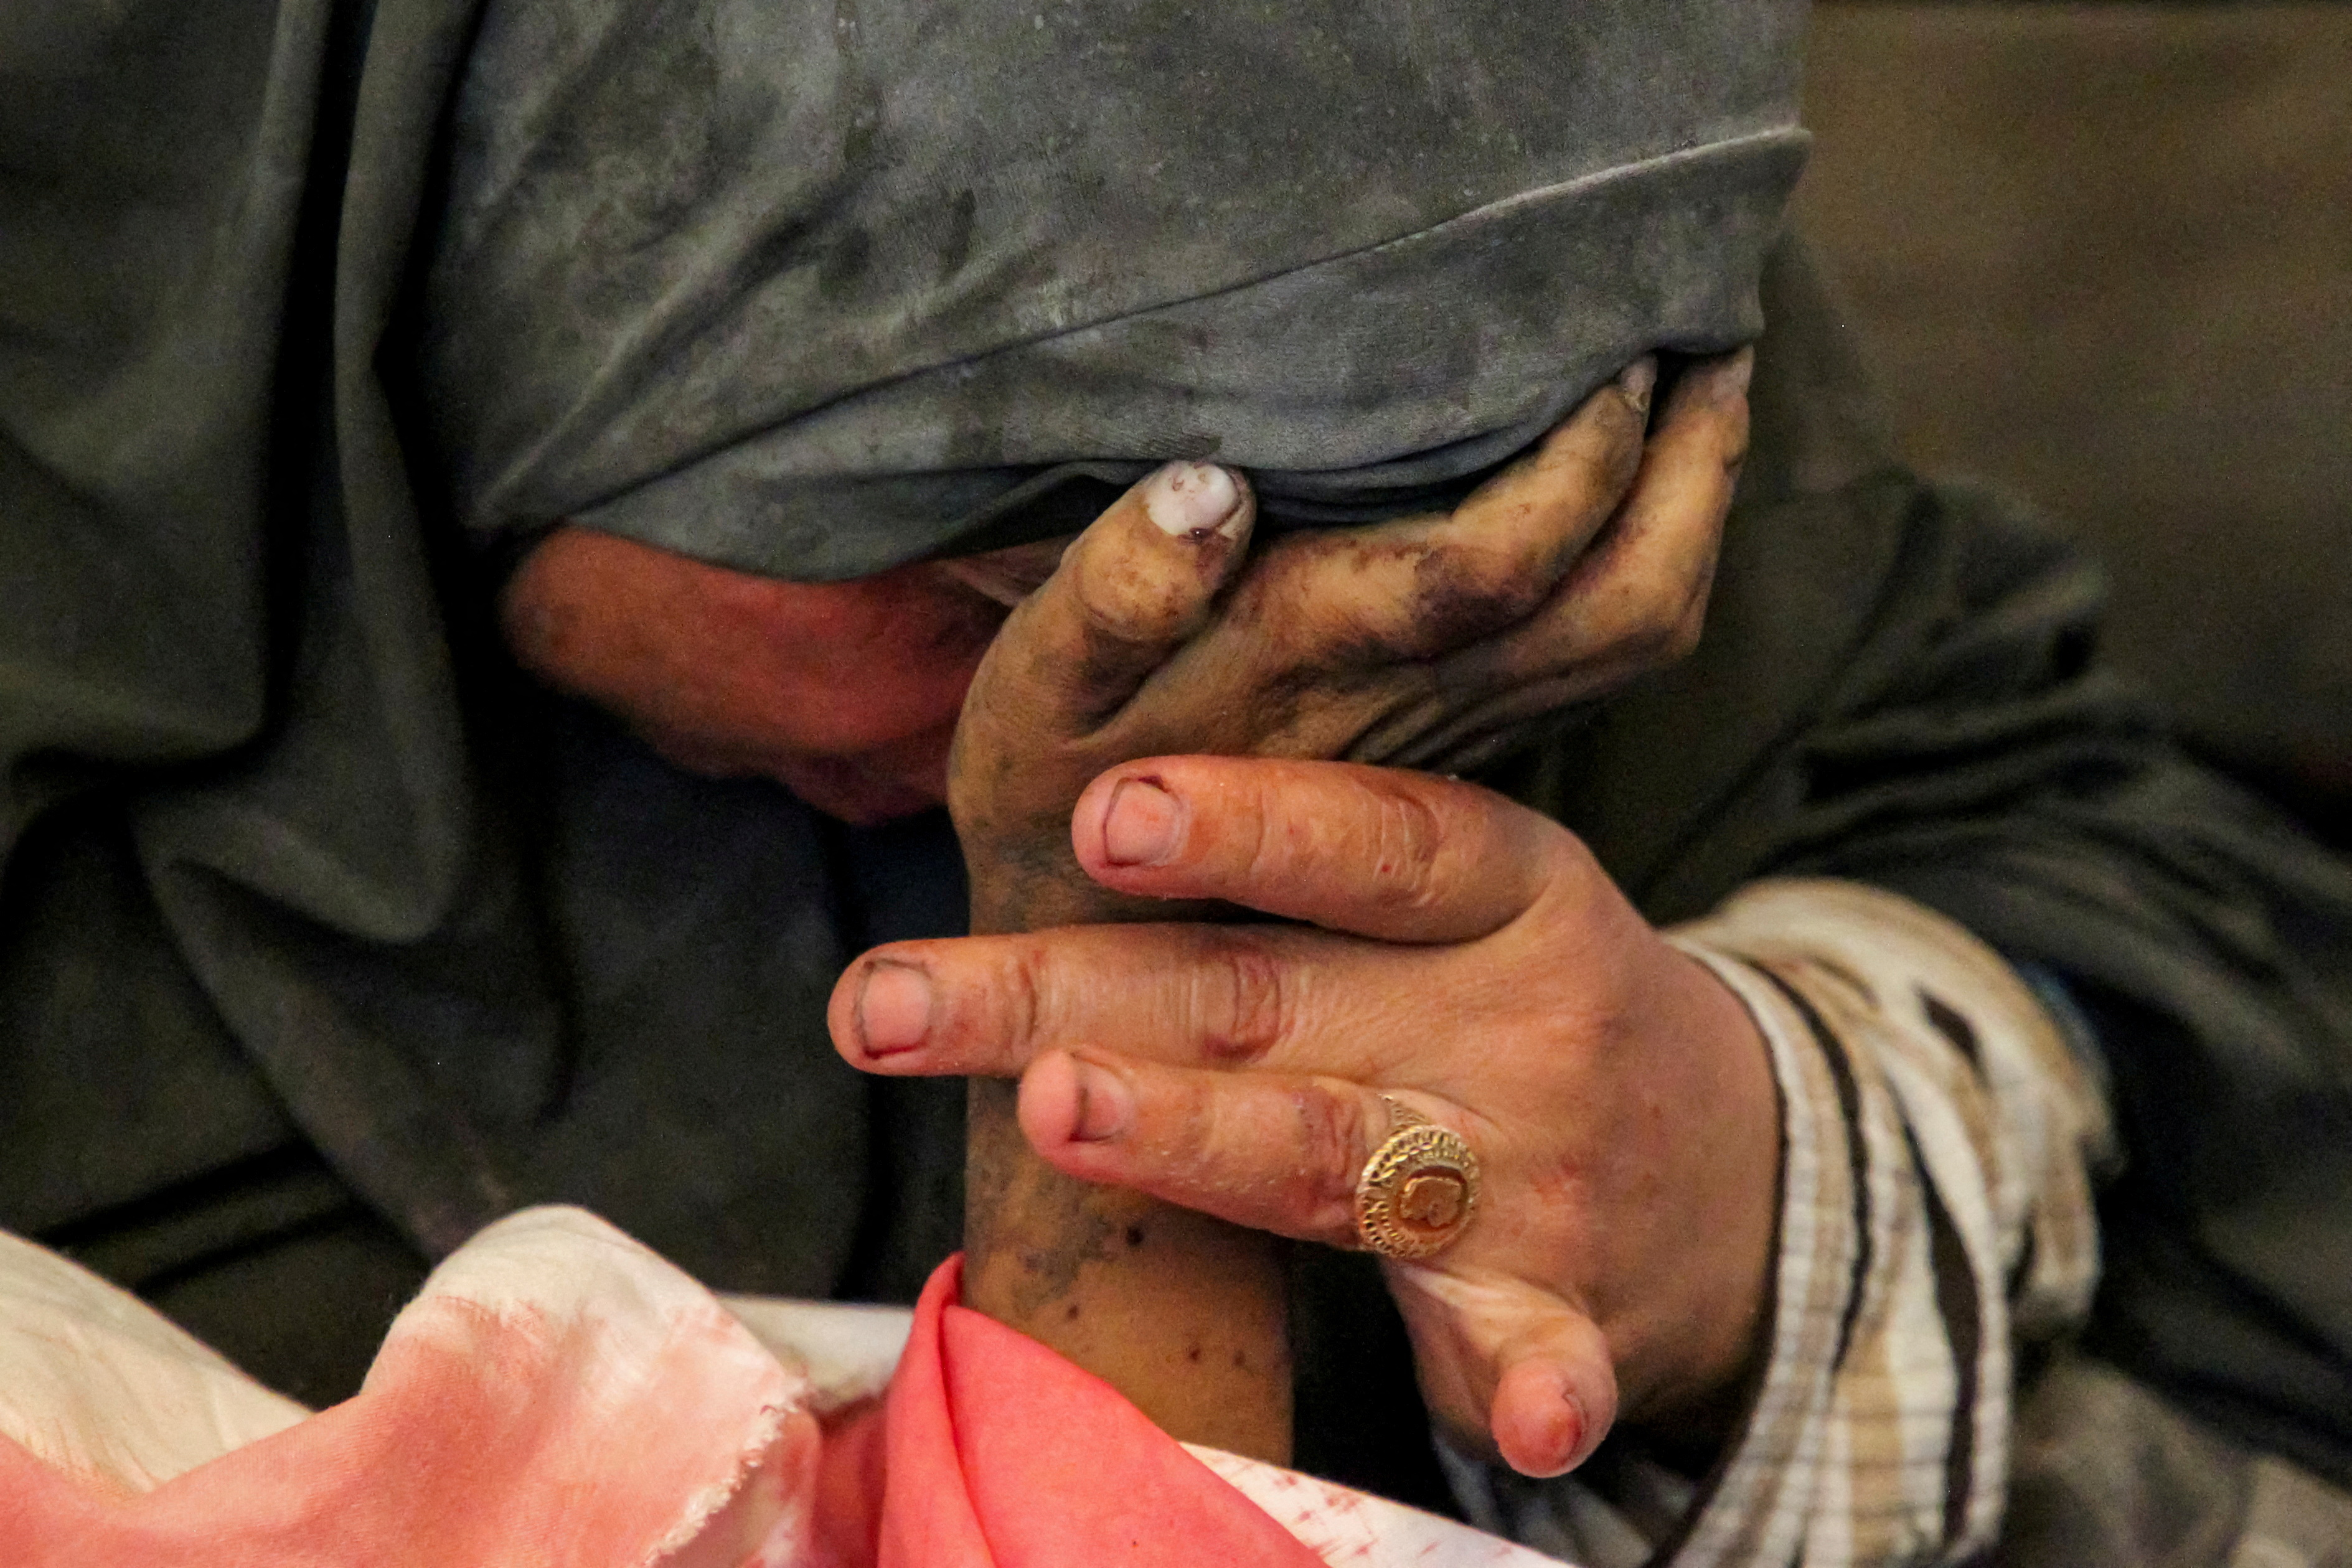 Palestinian woman Buthayna Abu Jazar reacts as she holds the hand of her son Hazma, in Rafah